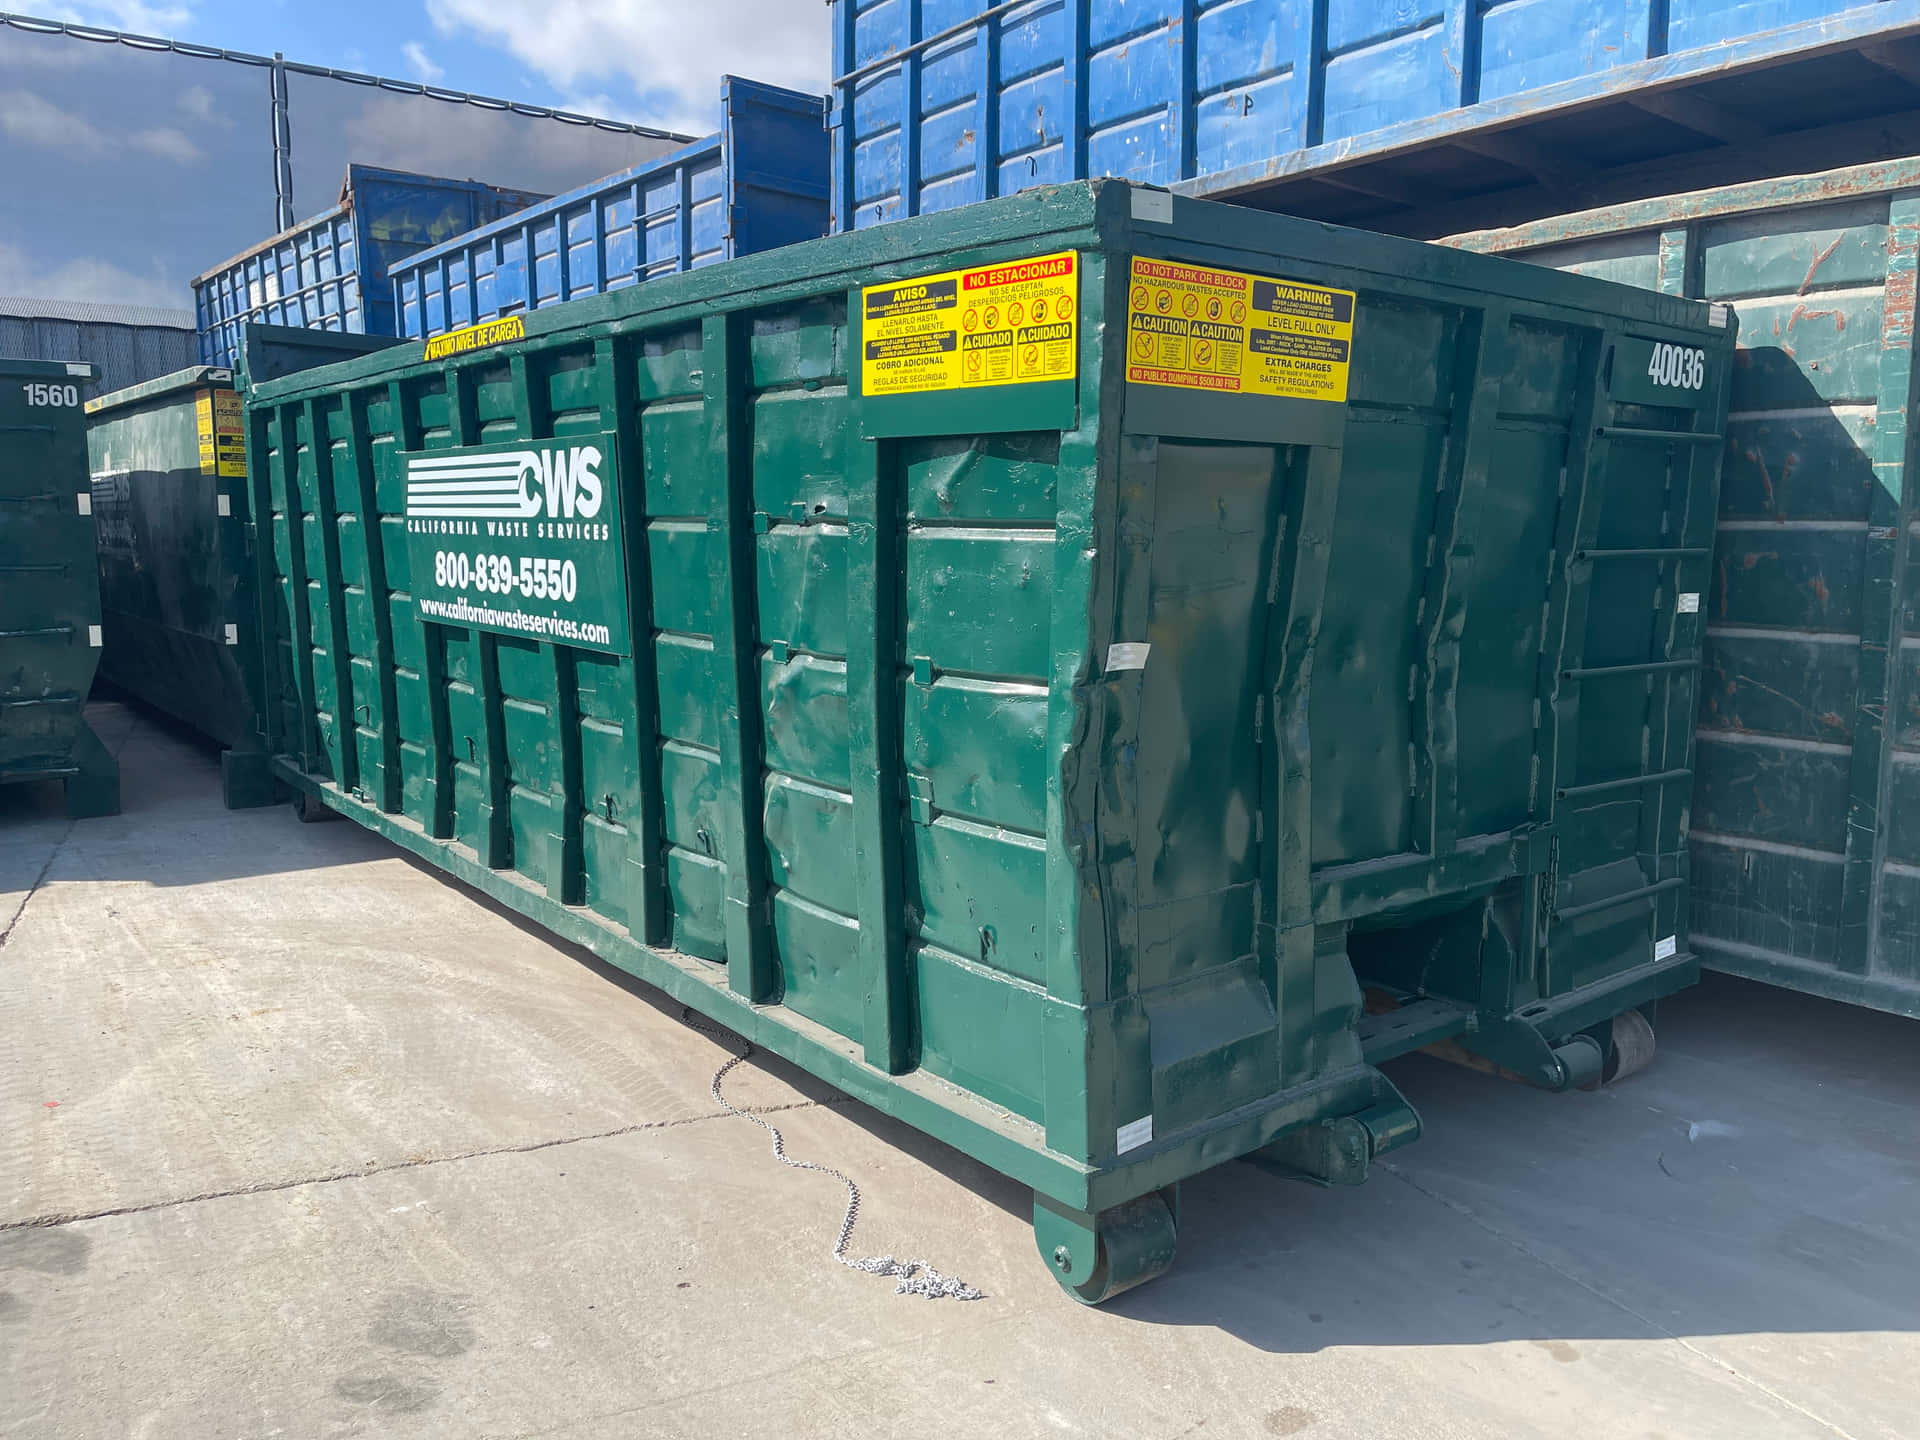 A Green Container Sitting Next To Another Container